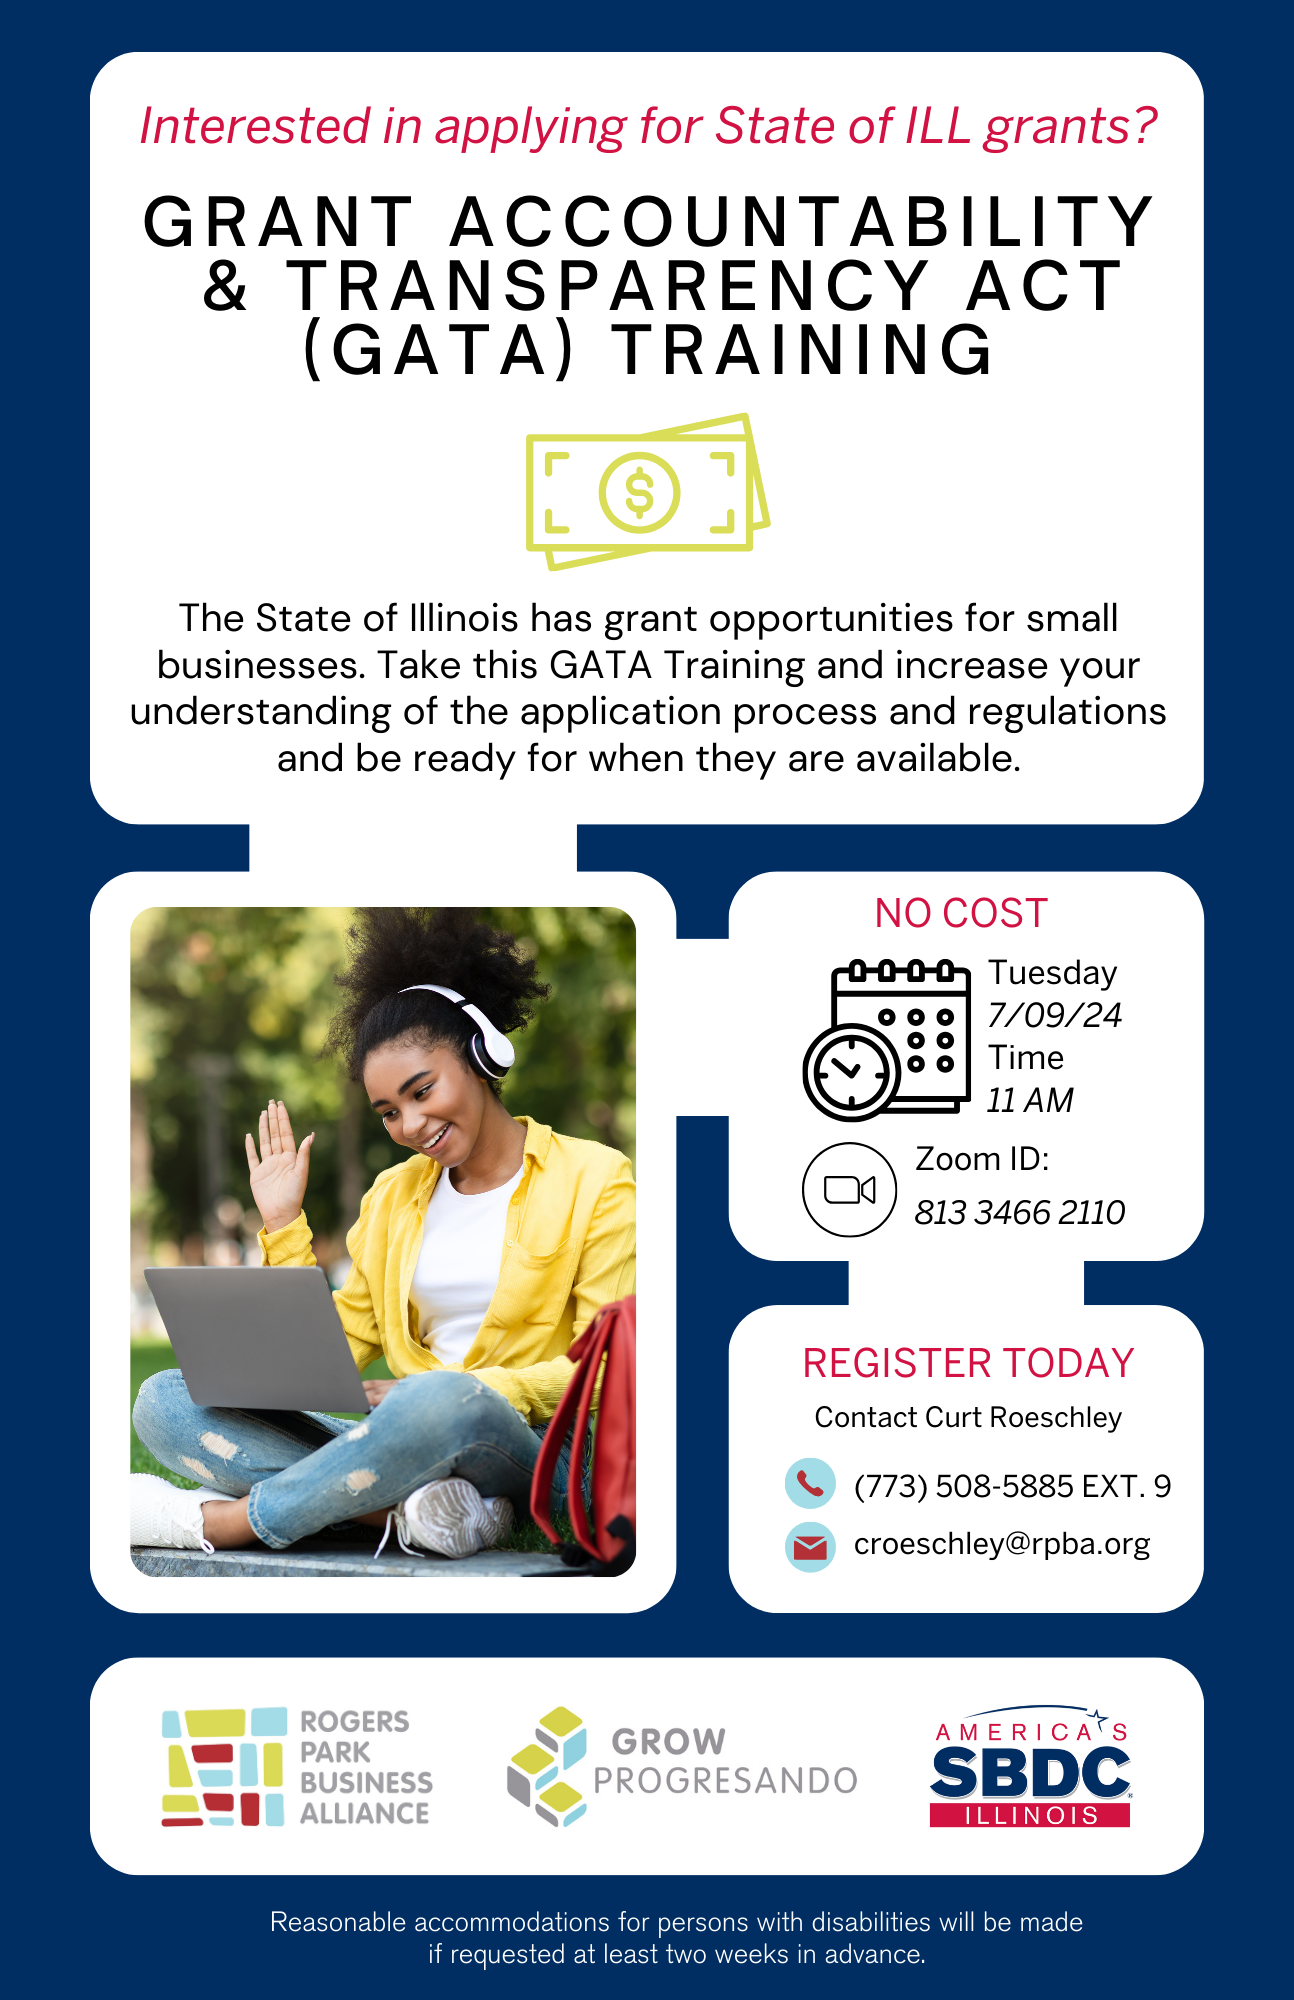 Grant Accountability and Transparency Act (GATA) Training, rogers-park-business-alliance